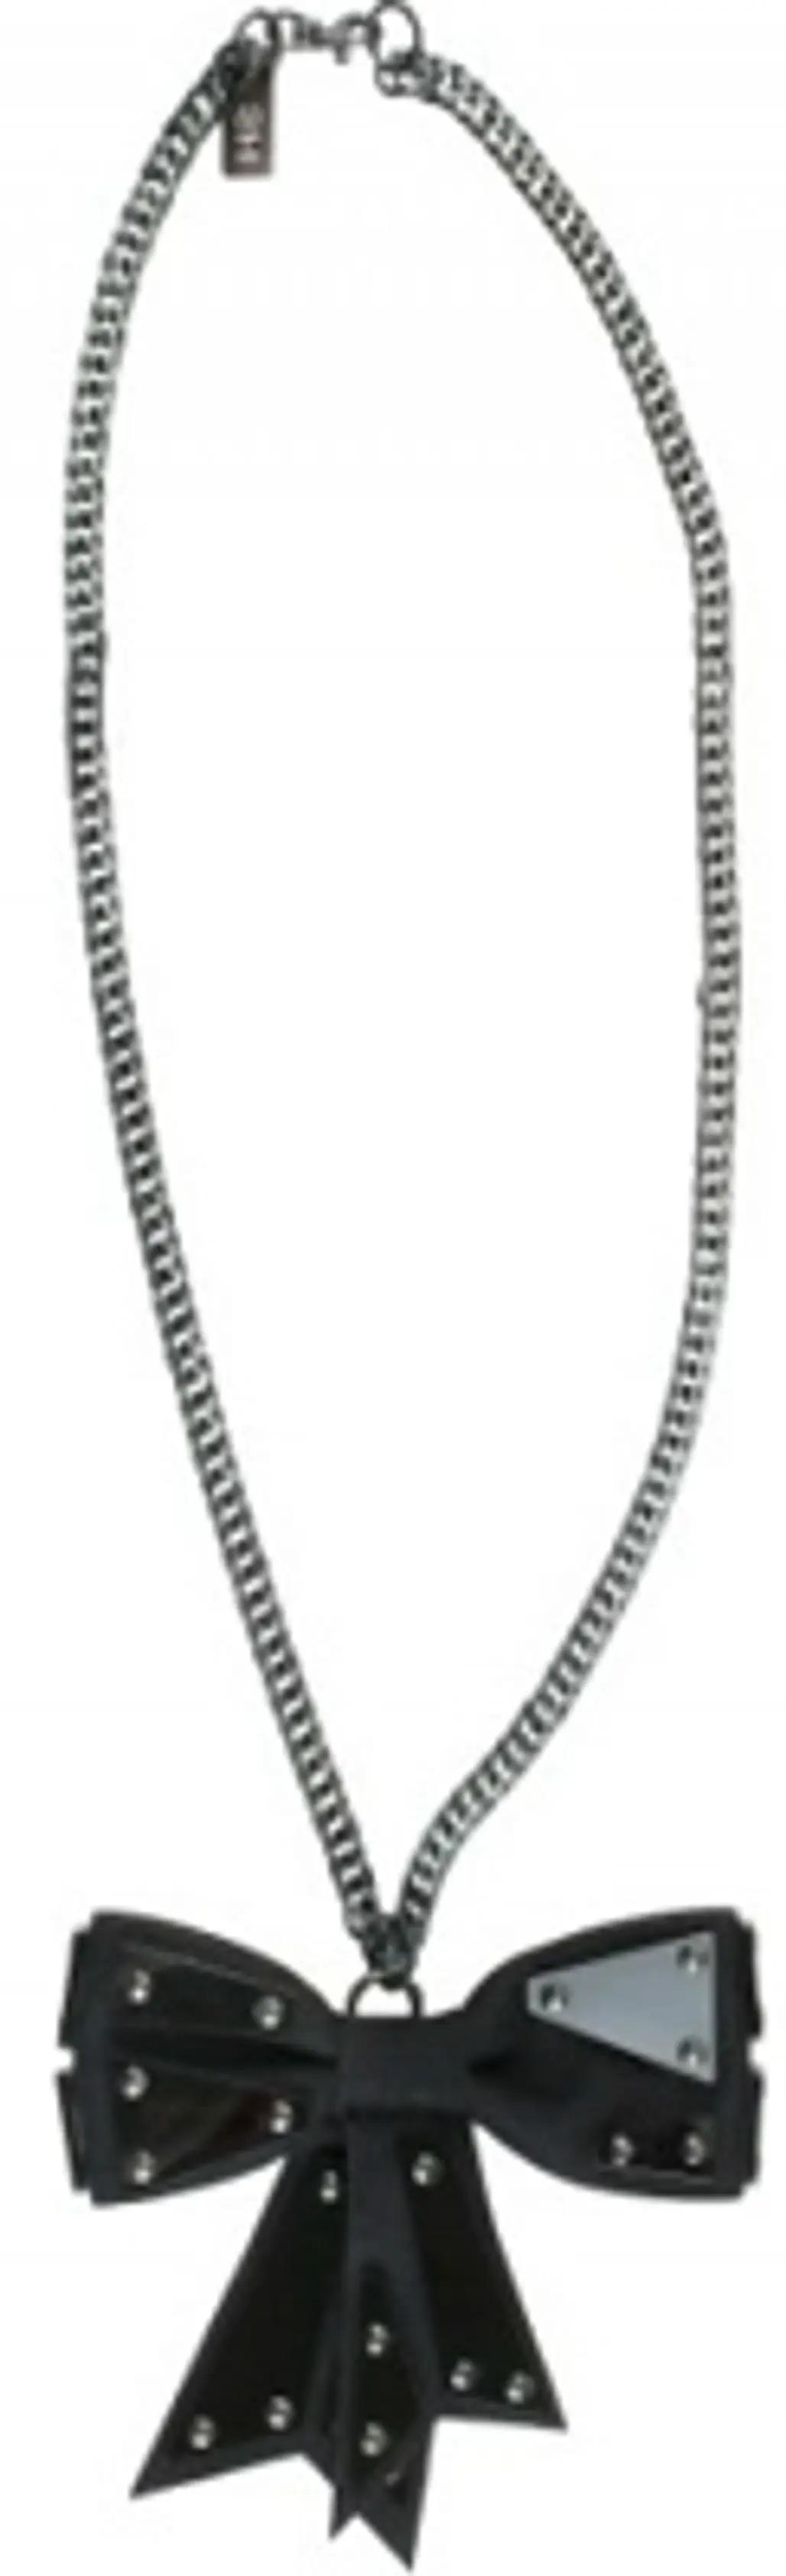 Sophie Hulme Perspex Brass Armoured Wool Necklace - Punk Sass Must-Have Piece of Perspex Jewelry